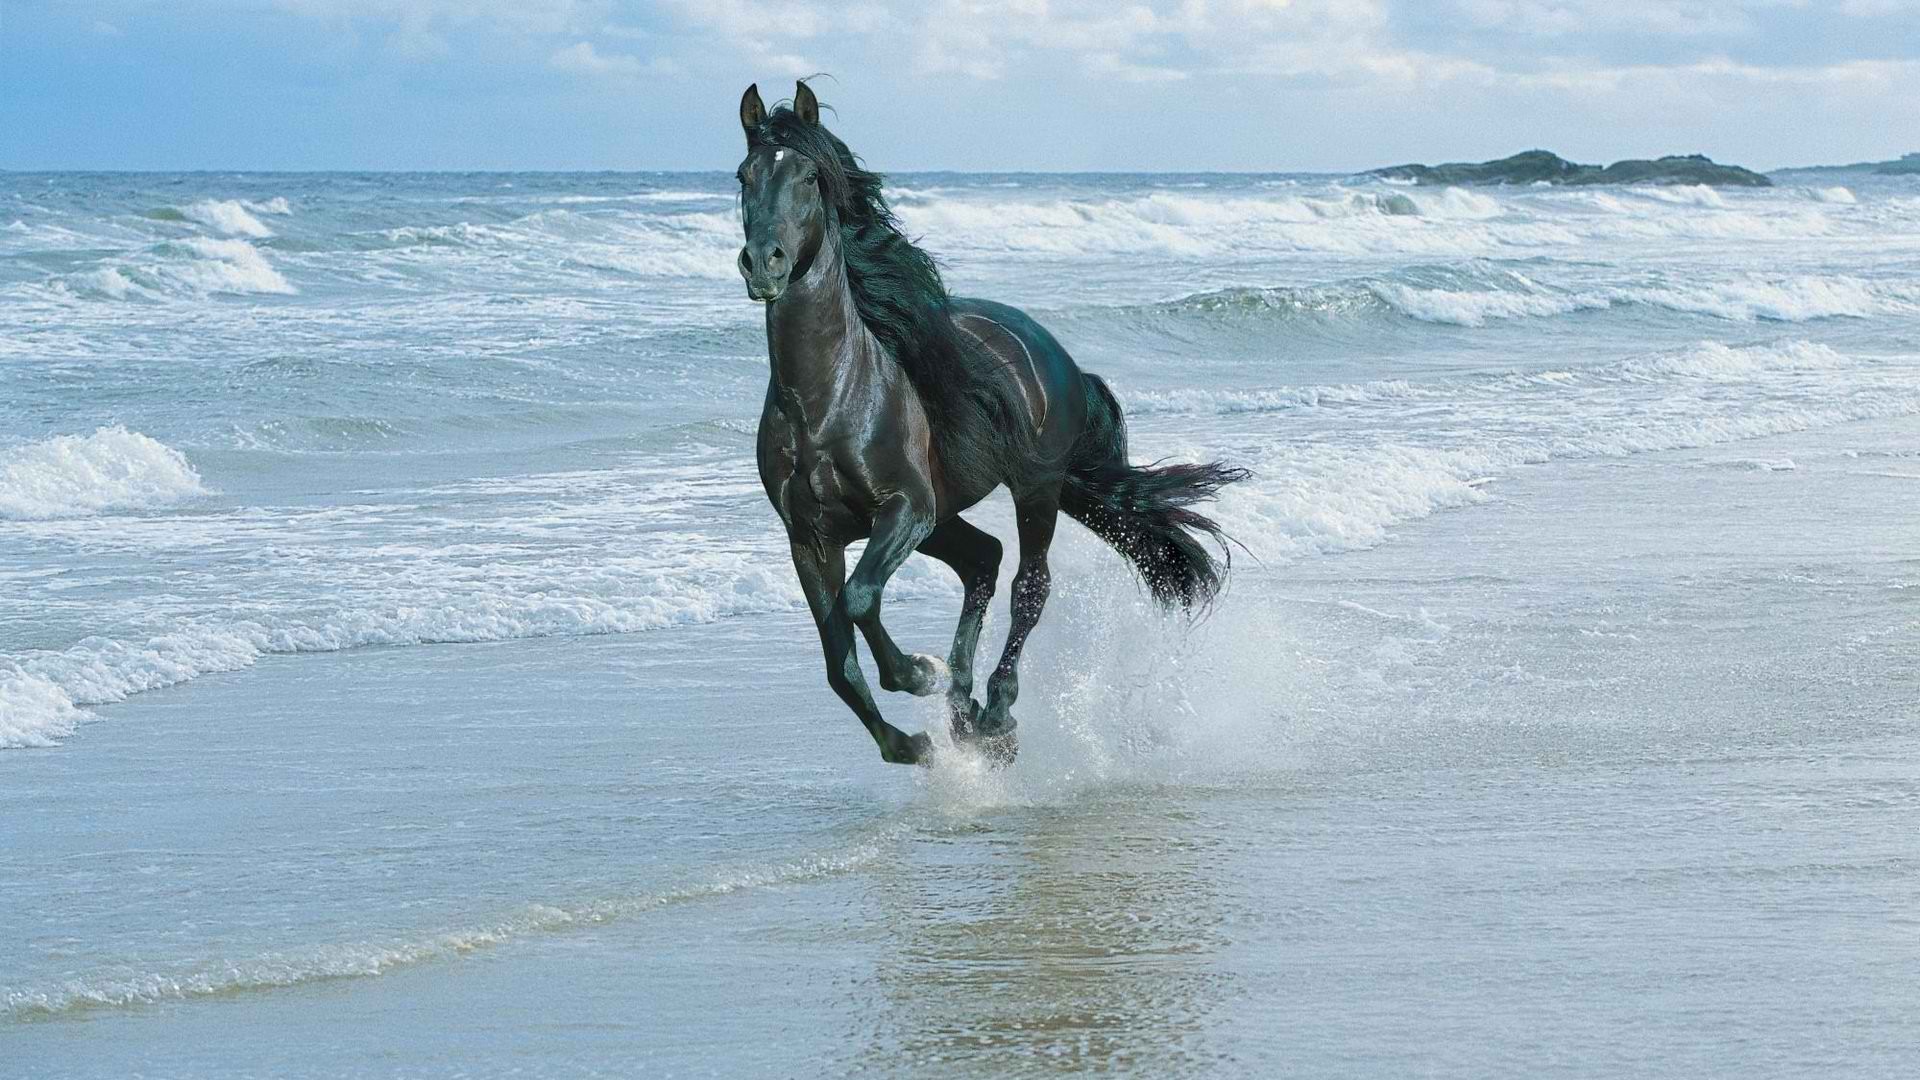 1920x1080 Horse riding on the beach wallpapers and images - wallpapers, pictures,  photos